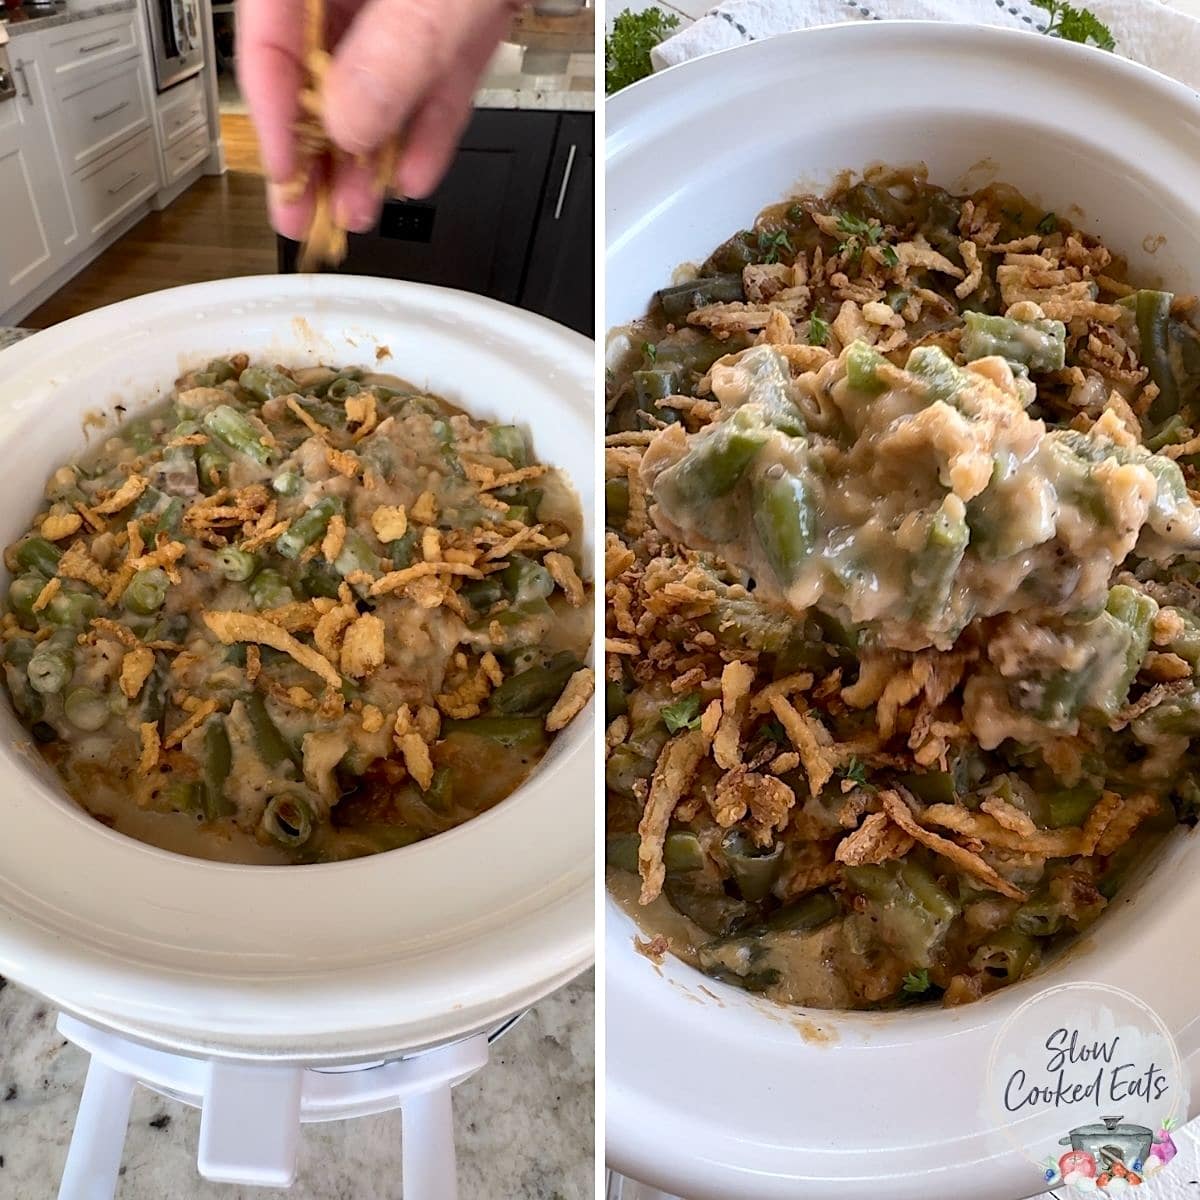 Sprinkling french fried onions on top of cooked crockpot green bean casserole.